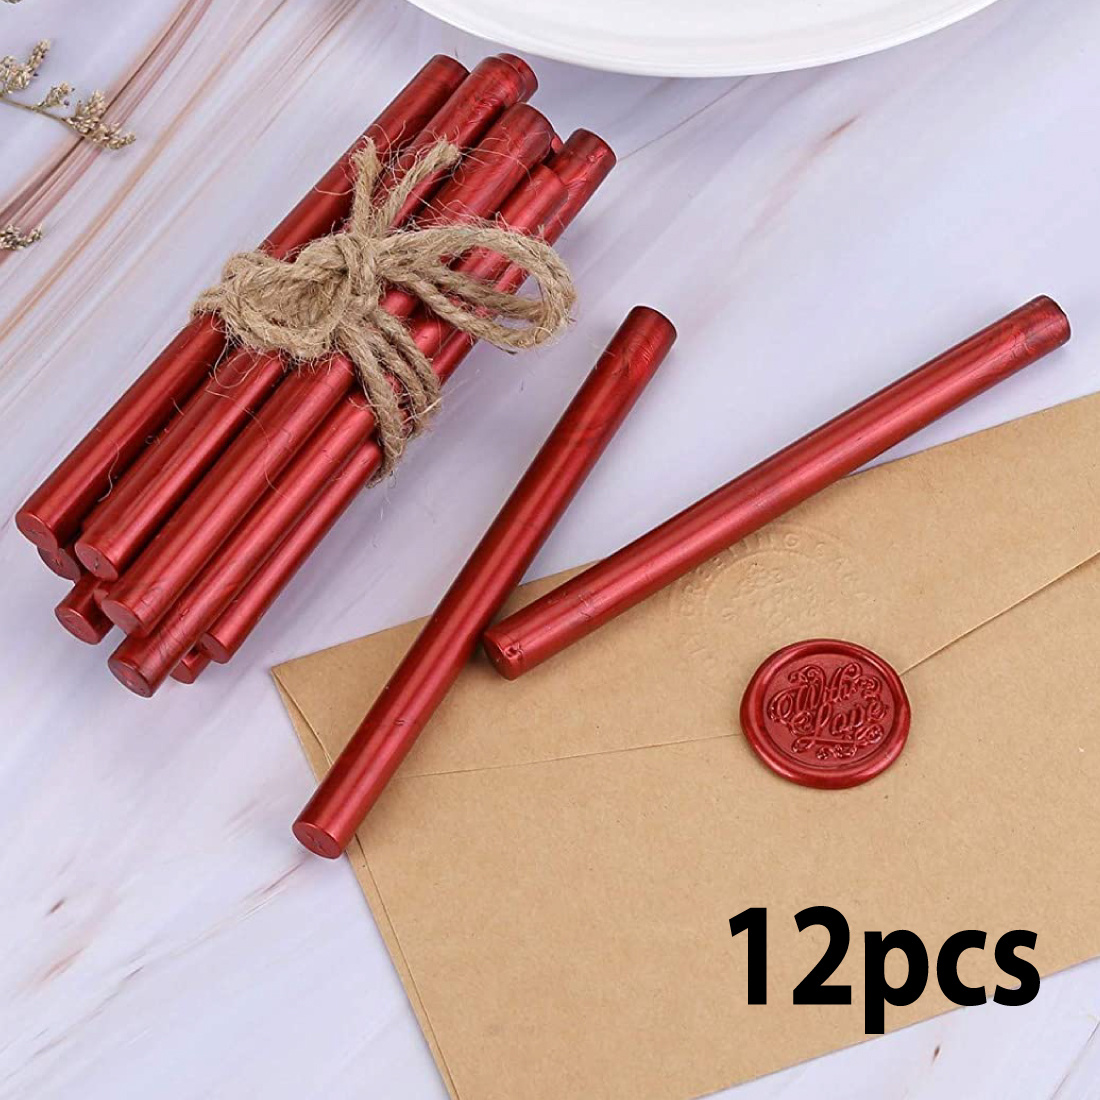  Red Sealing Wax Sticks STAMPMASTER 20pcs Wax Seal Sticks, Glue  Gun Red Wax Sticks for Wedding Invitations Letter Christmas Package  Decoration (Red) : Arts, Crafts & Sewing